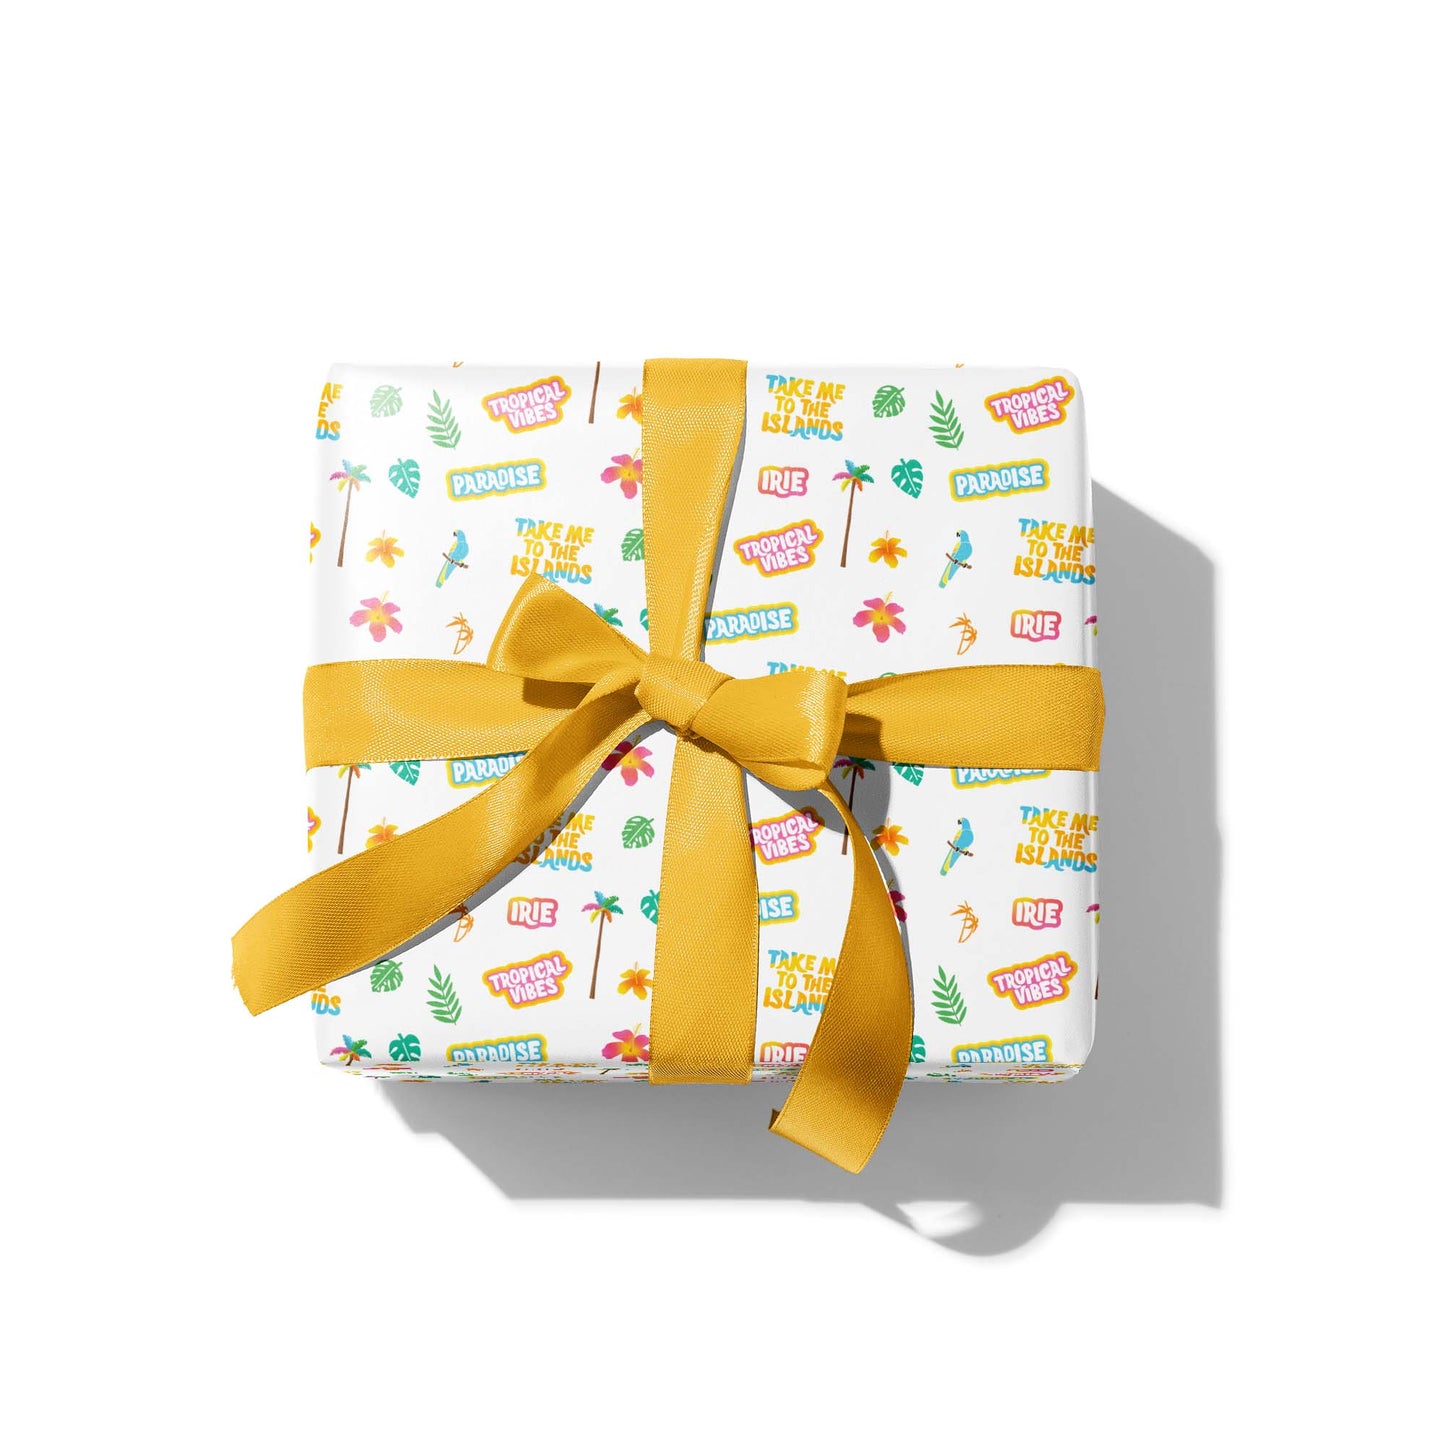 Paradise Stickers Wrapping Paper